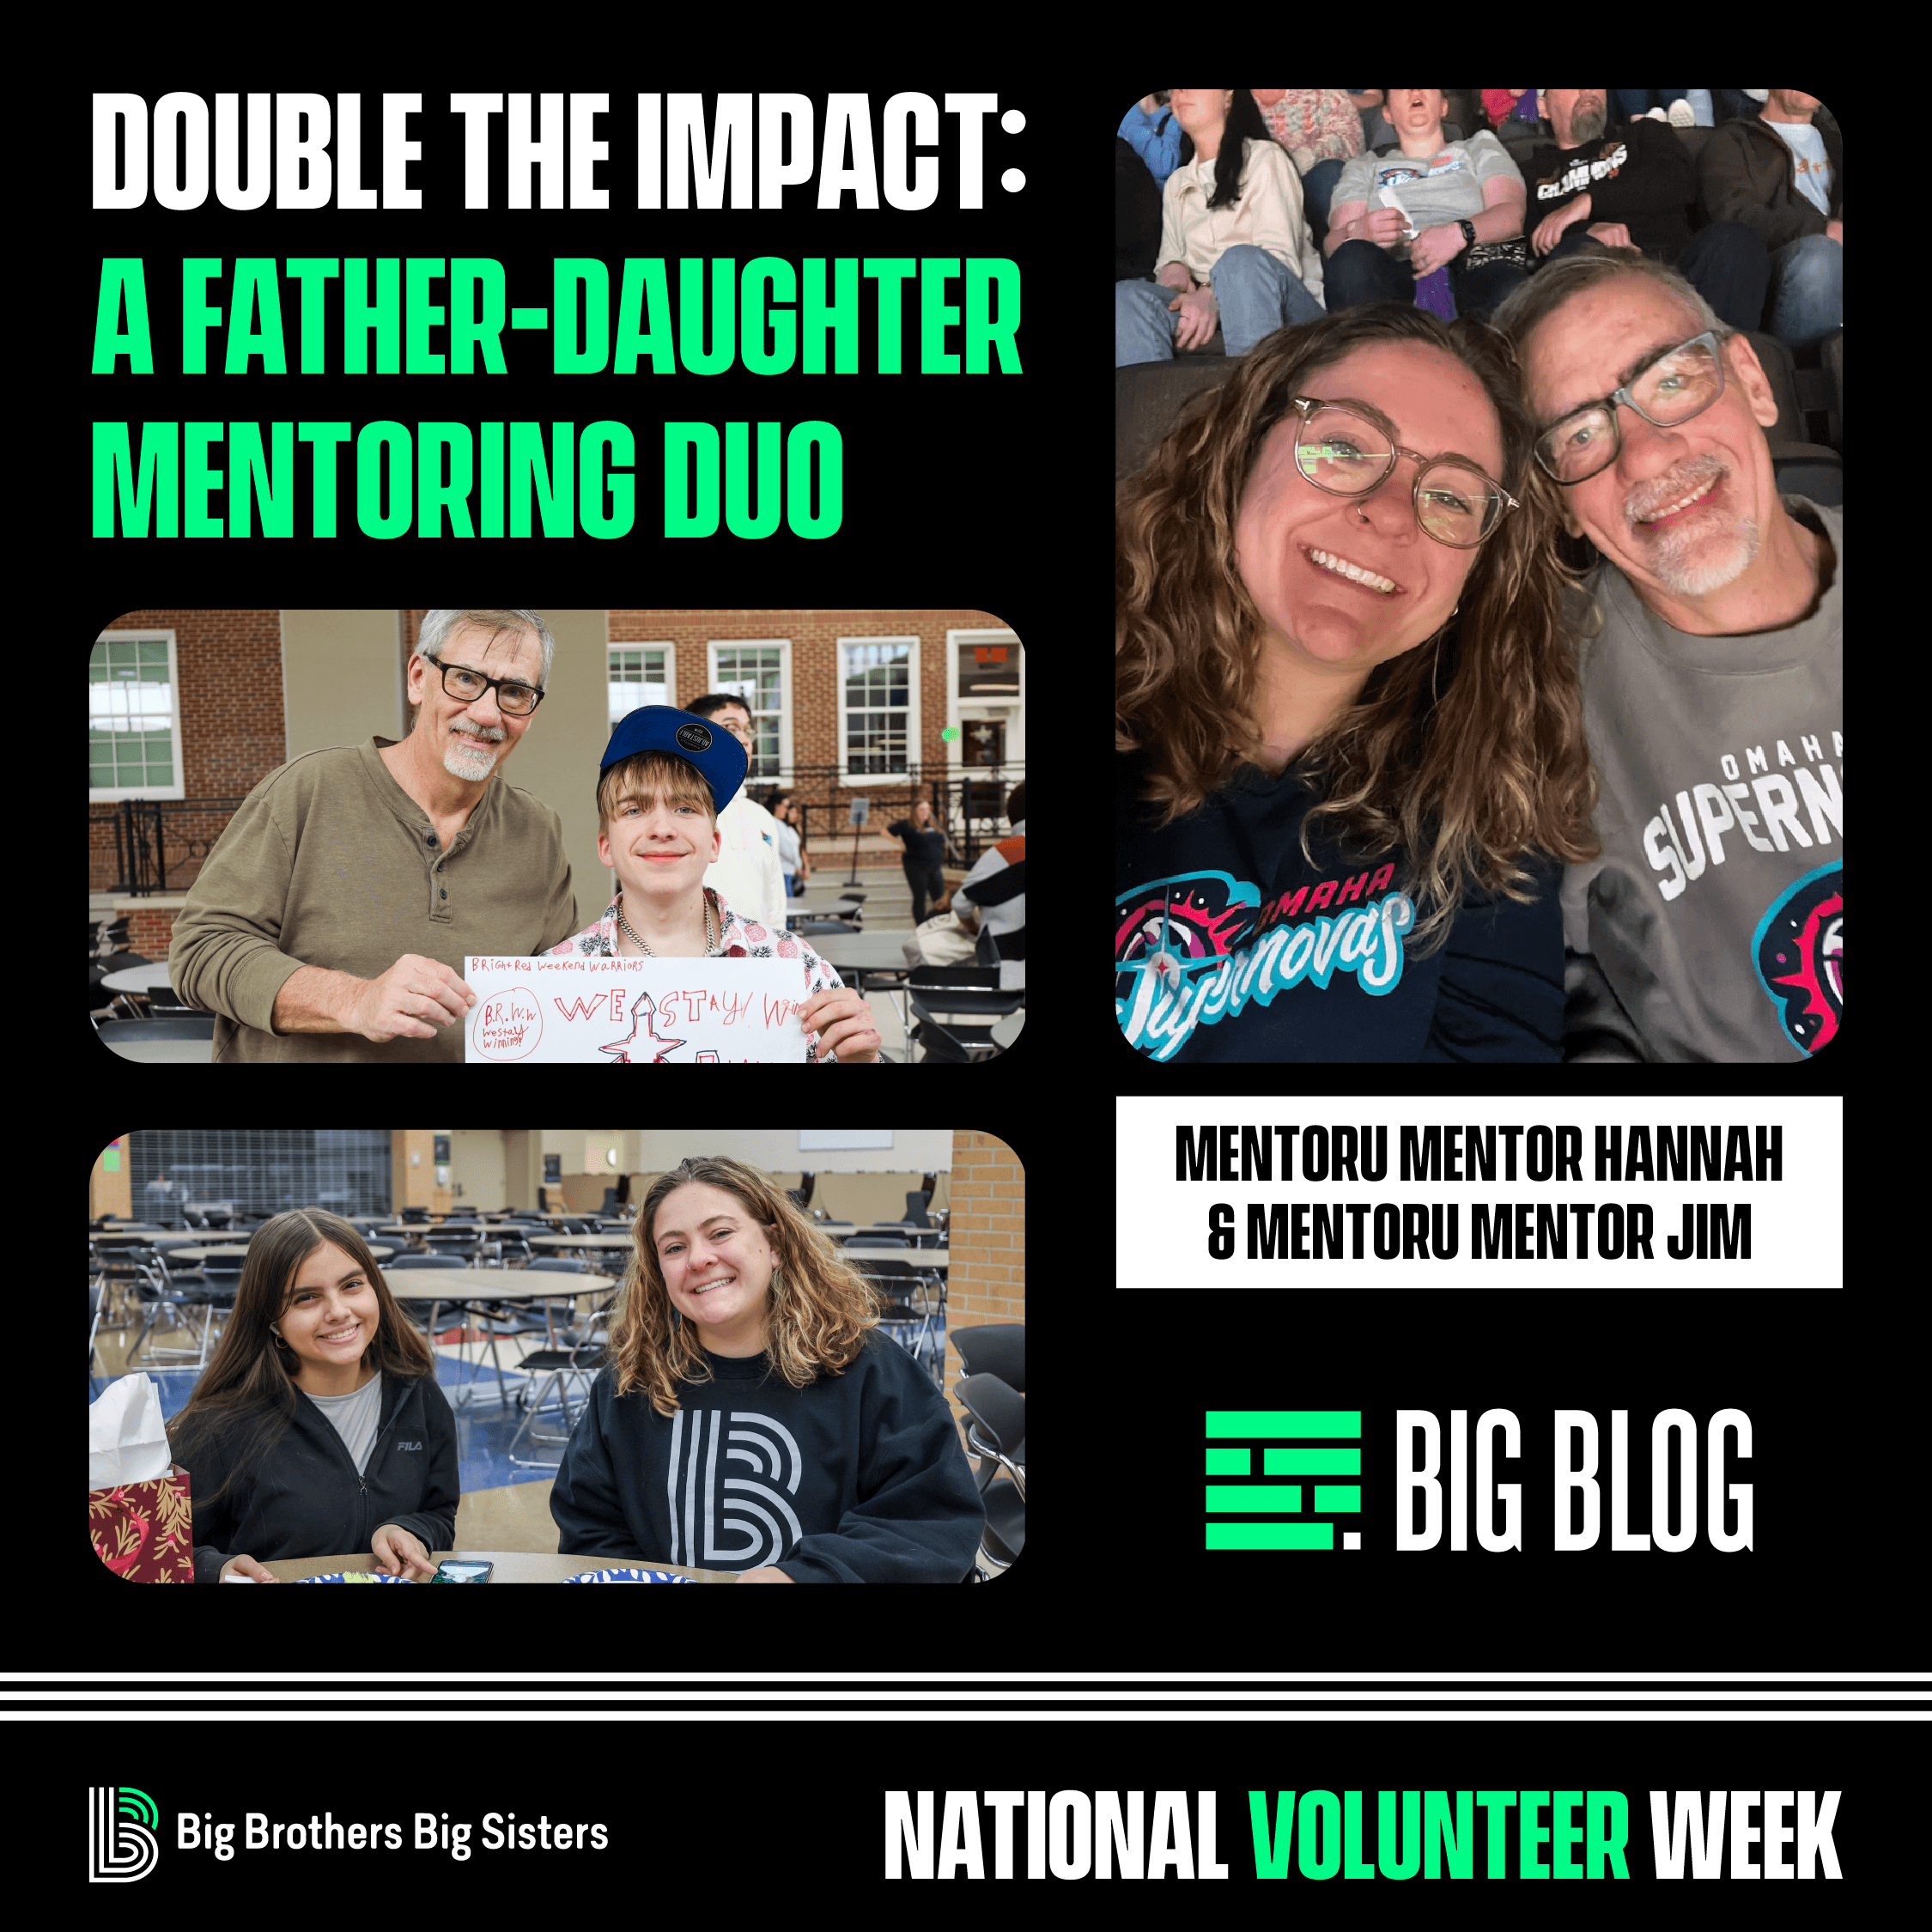 Double the Impact: A Father-Daughter Mentoring Duo